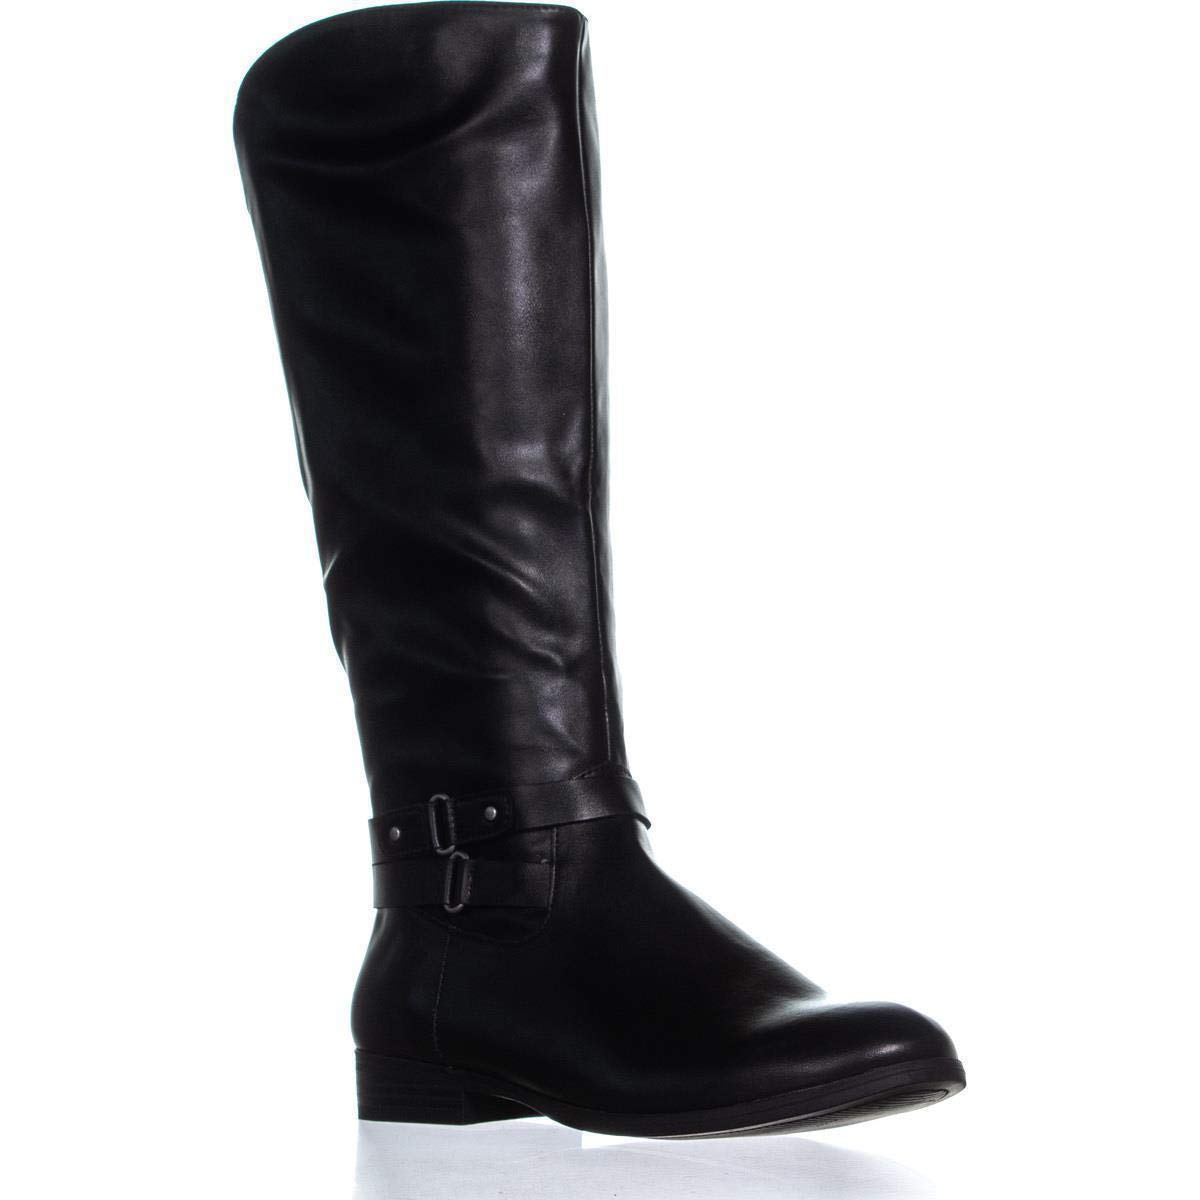 Style & Co. Womens Round Toe Knee High Riding Boots, Black, Size 7.5 ...